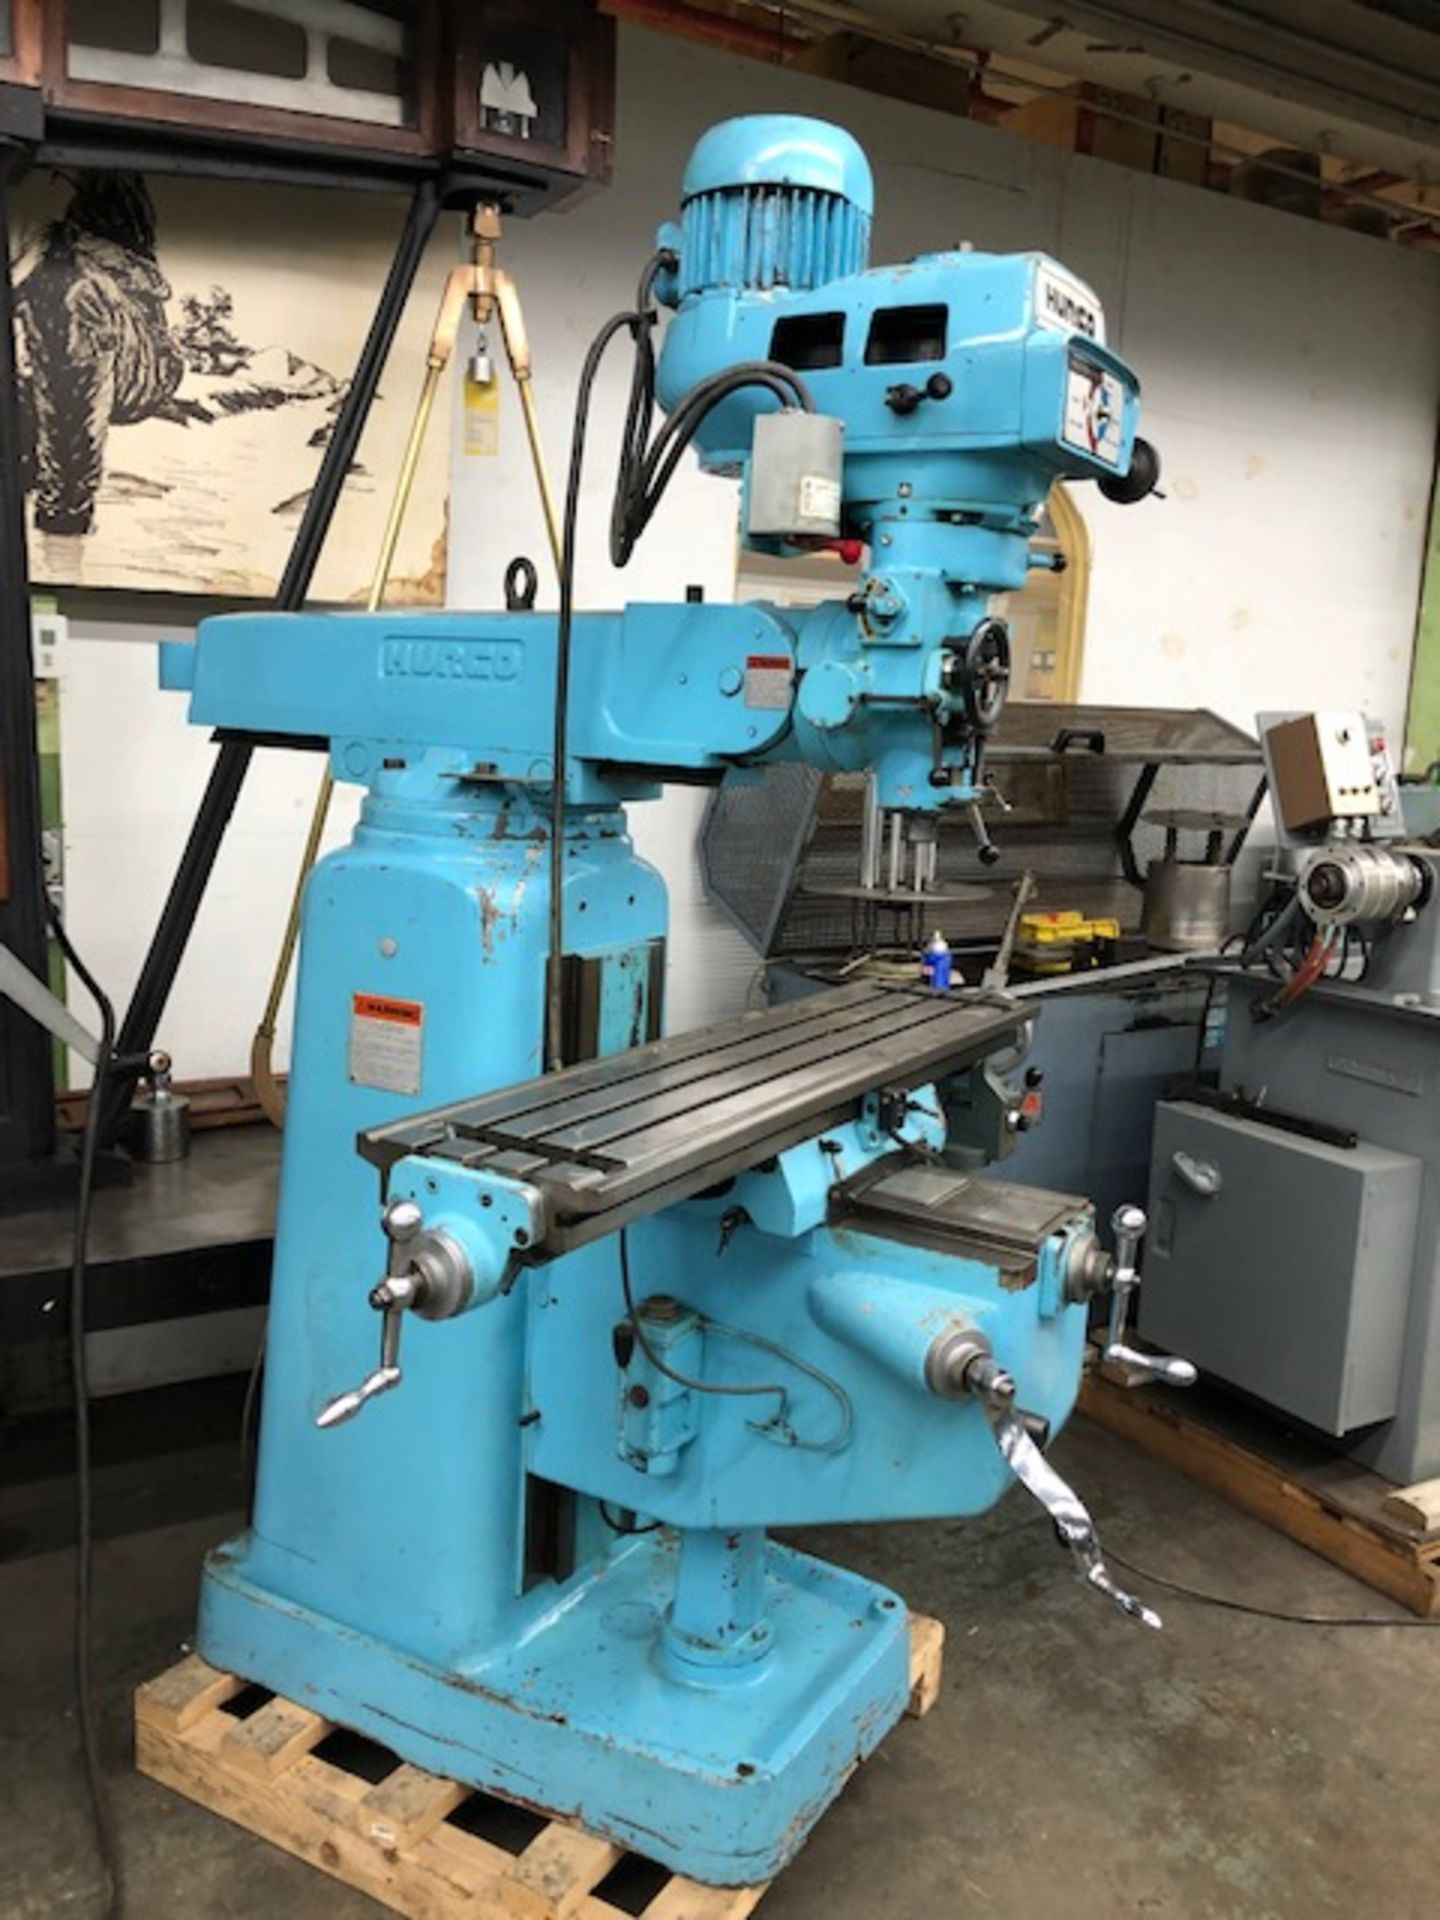 HURCO MDL. SM1 3HP VERTICAL MILLING MACHINE, 220V / 3PH / 60HZ, 9" X 42" TABLE, X-AXIS 24", Y-15", - Image 2 of 6